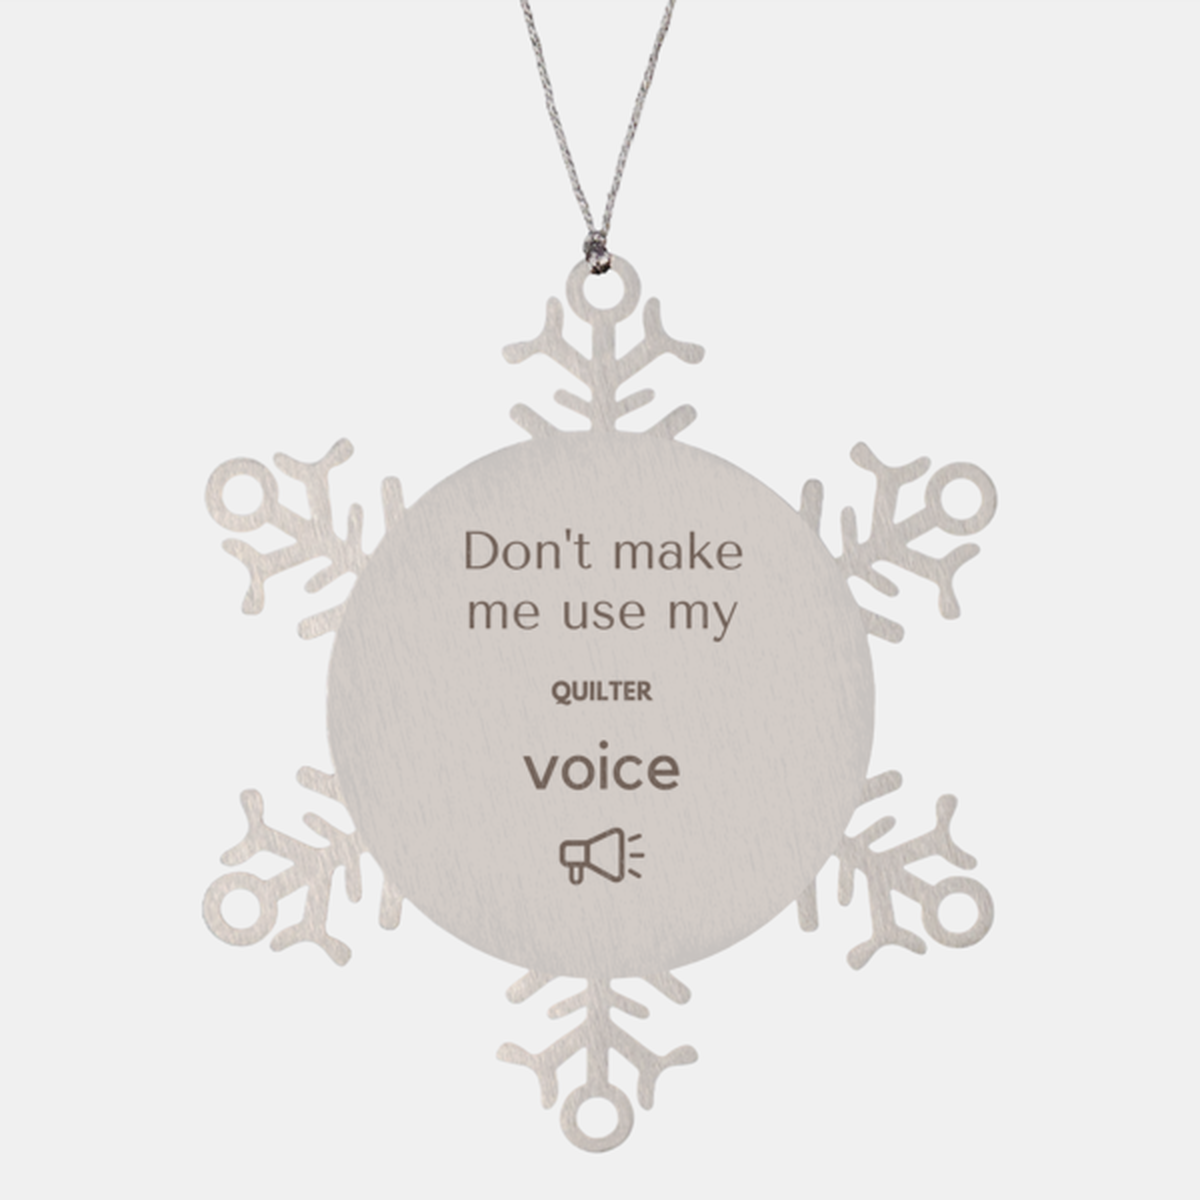 Don't make me use my Quilter voice, Sarcasm Quilter Ornament Gifts, Christmas Quilter Snowflake Ornament Unique Gifts For Quilter Coworkers, Men, Women, Colleague, Friends